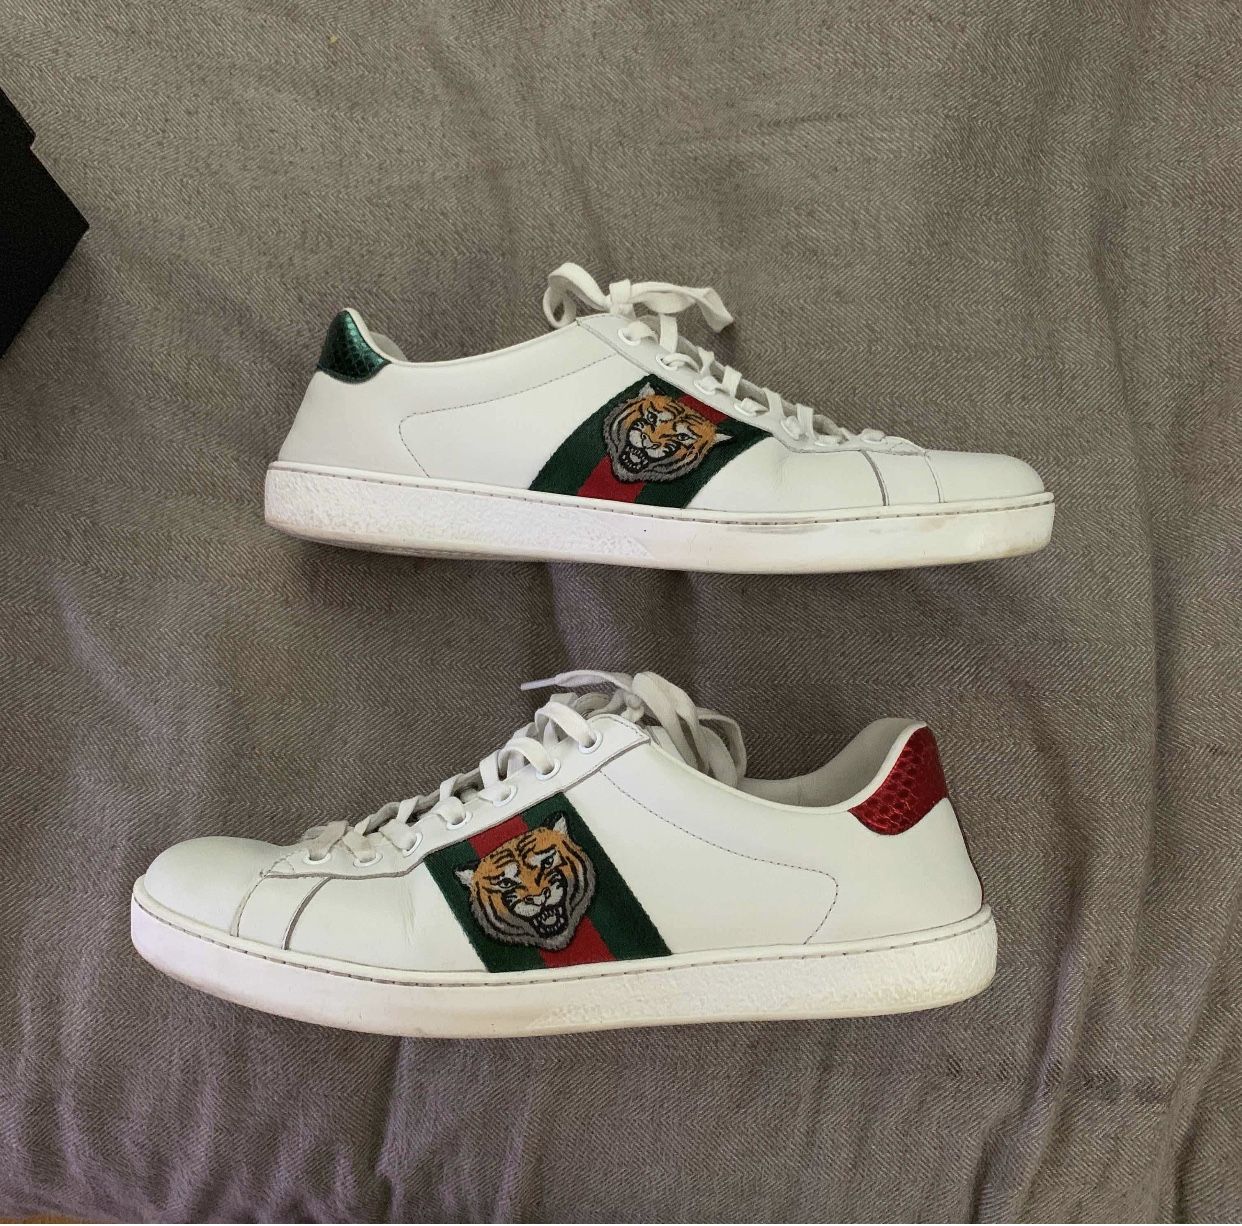 Gucci ace tiger shoes